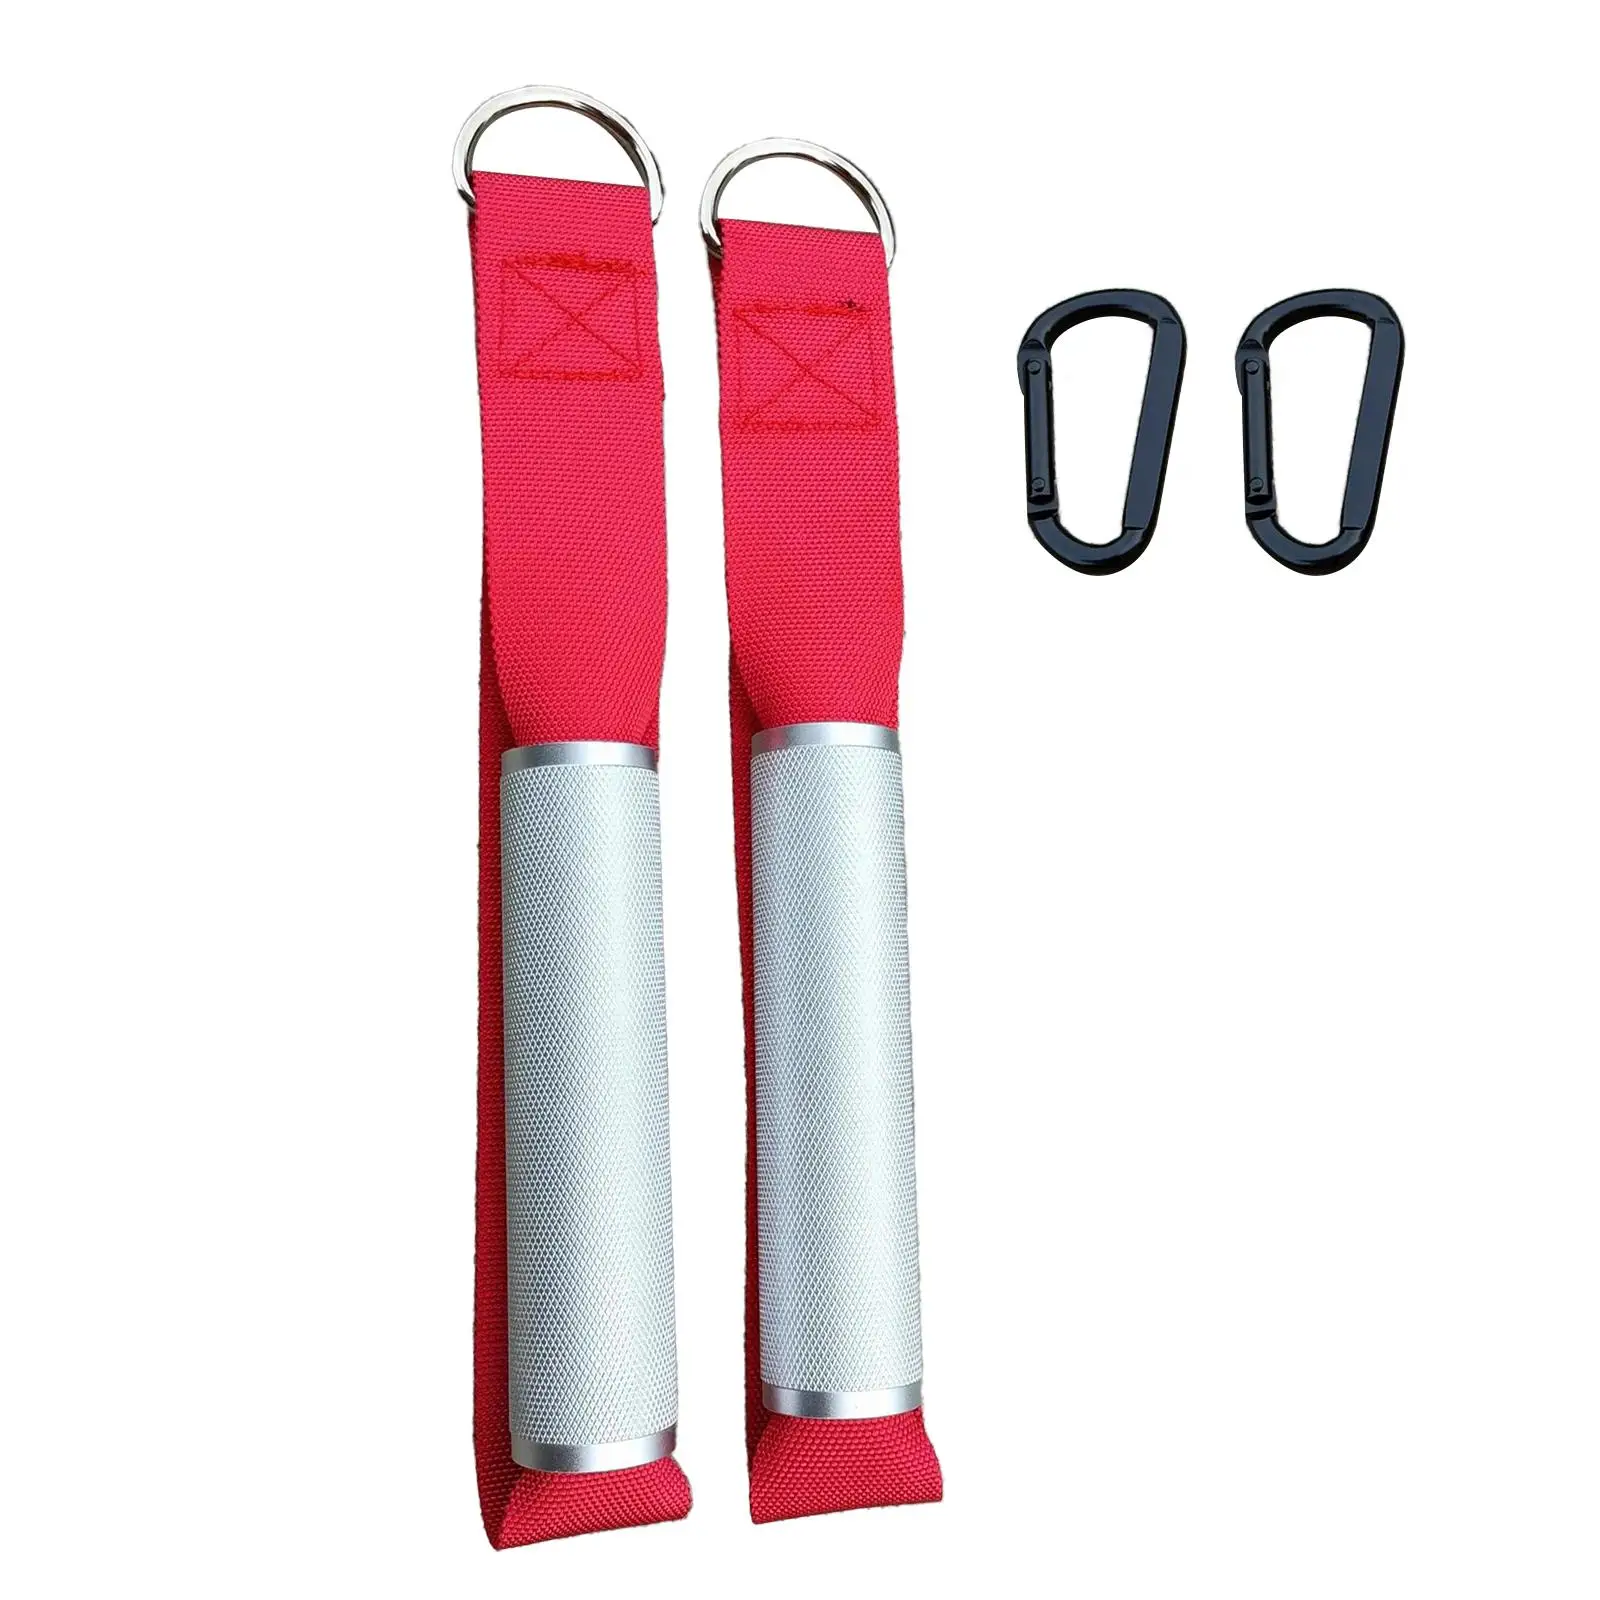 2Pcs Gym Handles Chest Fitness Fittings Workout Gymnastics Hanging LAT Row Bar Exercise Device for Yoga Strength Trainer Pilates